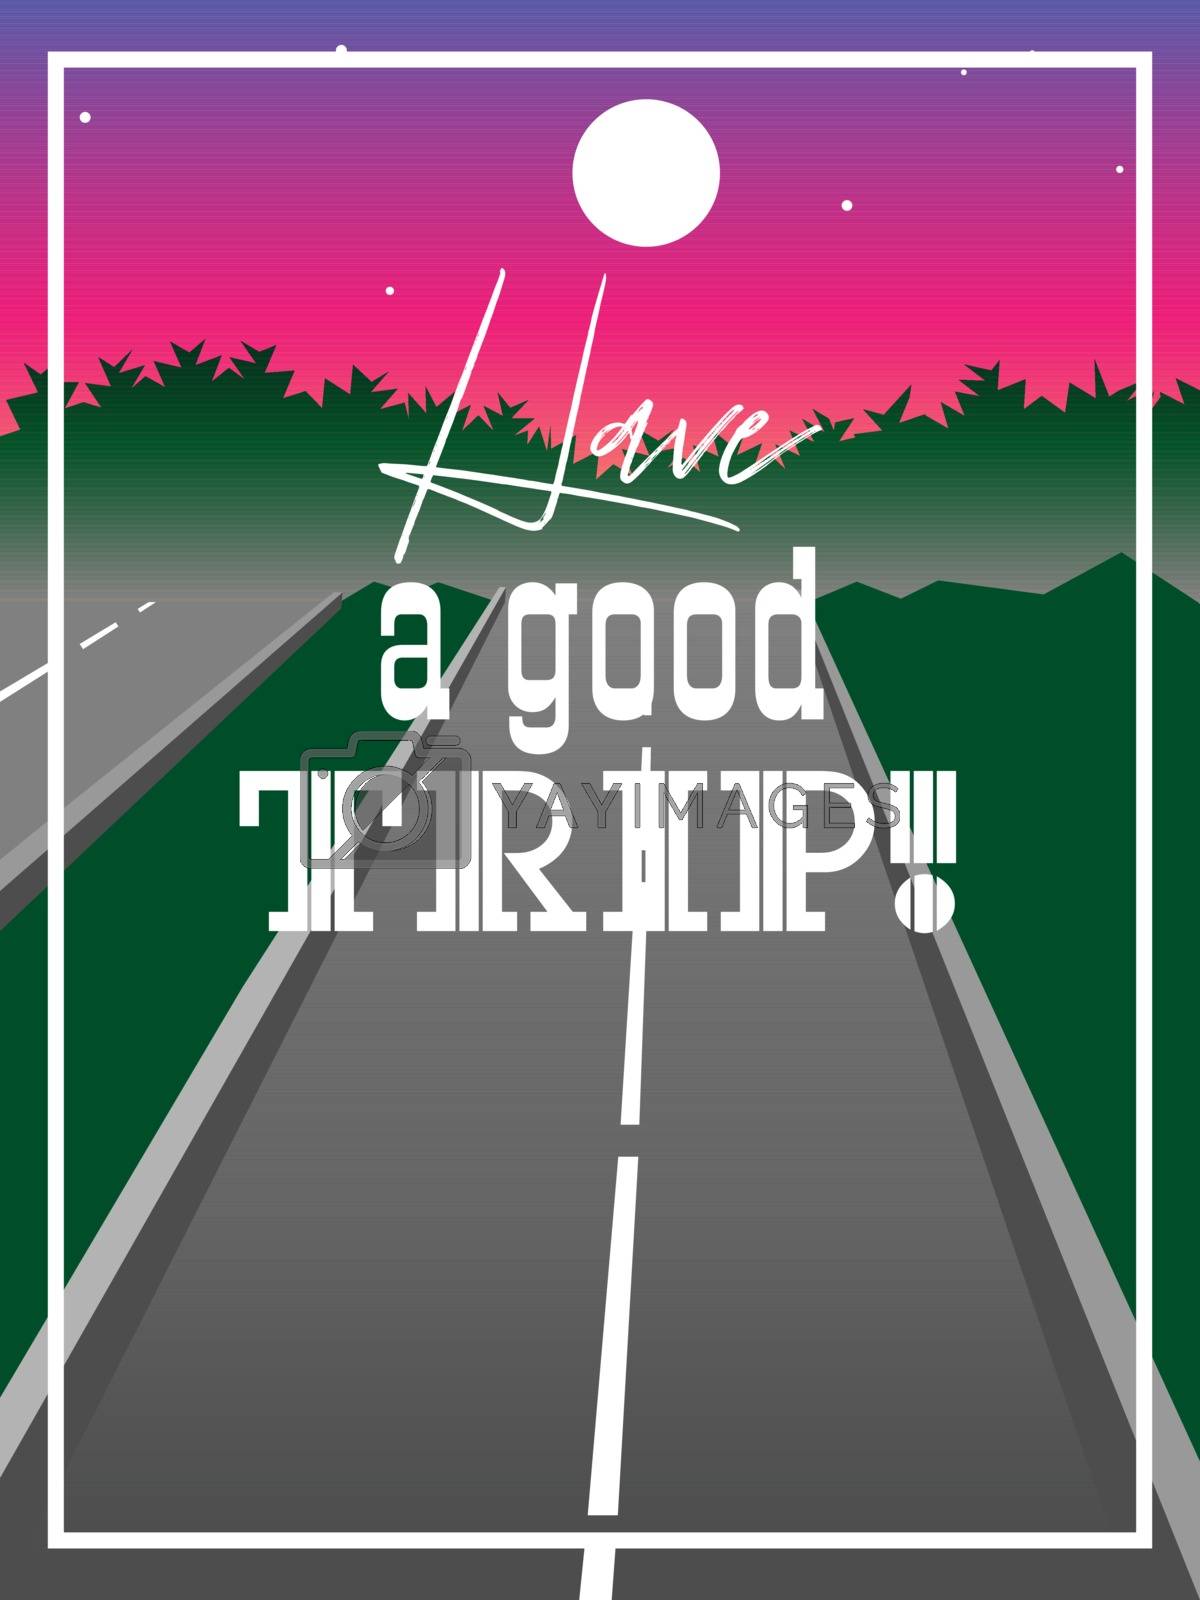 Royalty free image of Cartoon empty highway, sunrise sky and text 'have a good trip' by paranoido